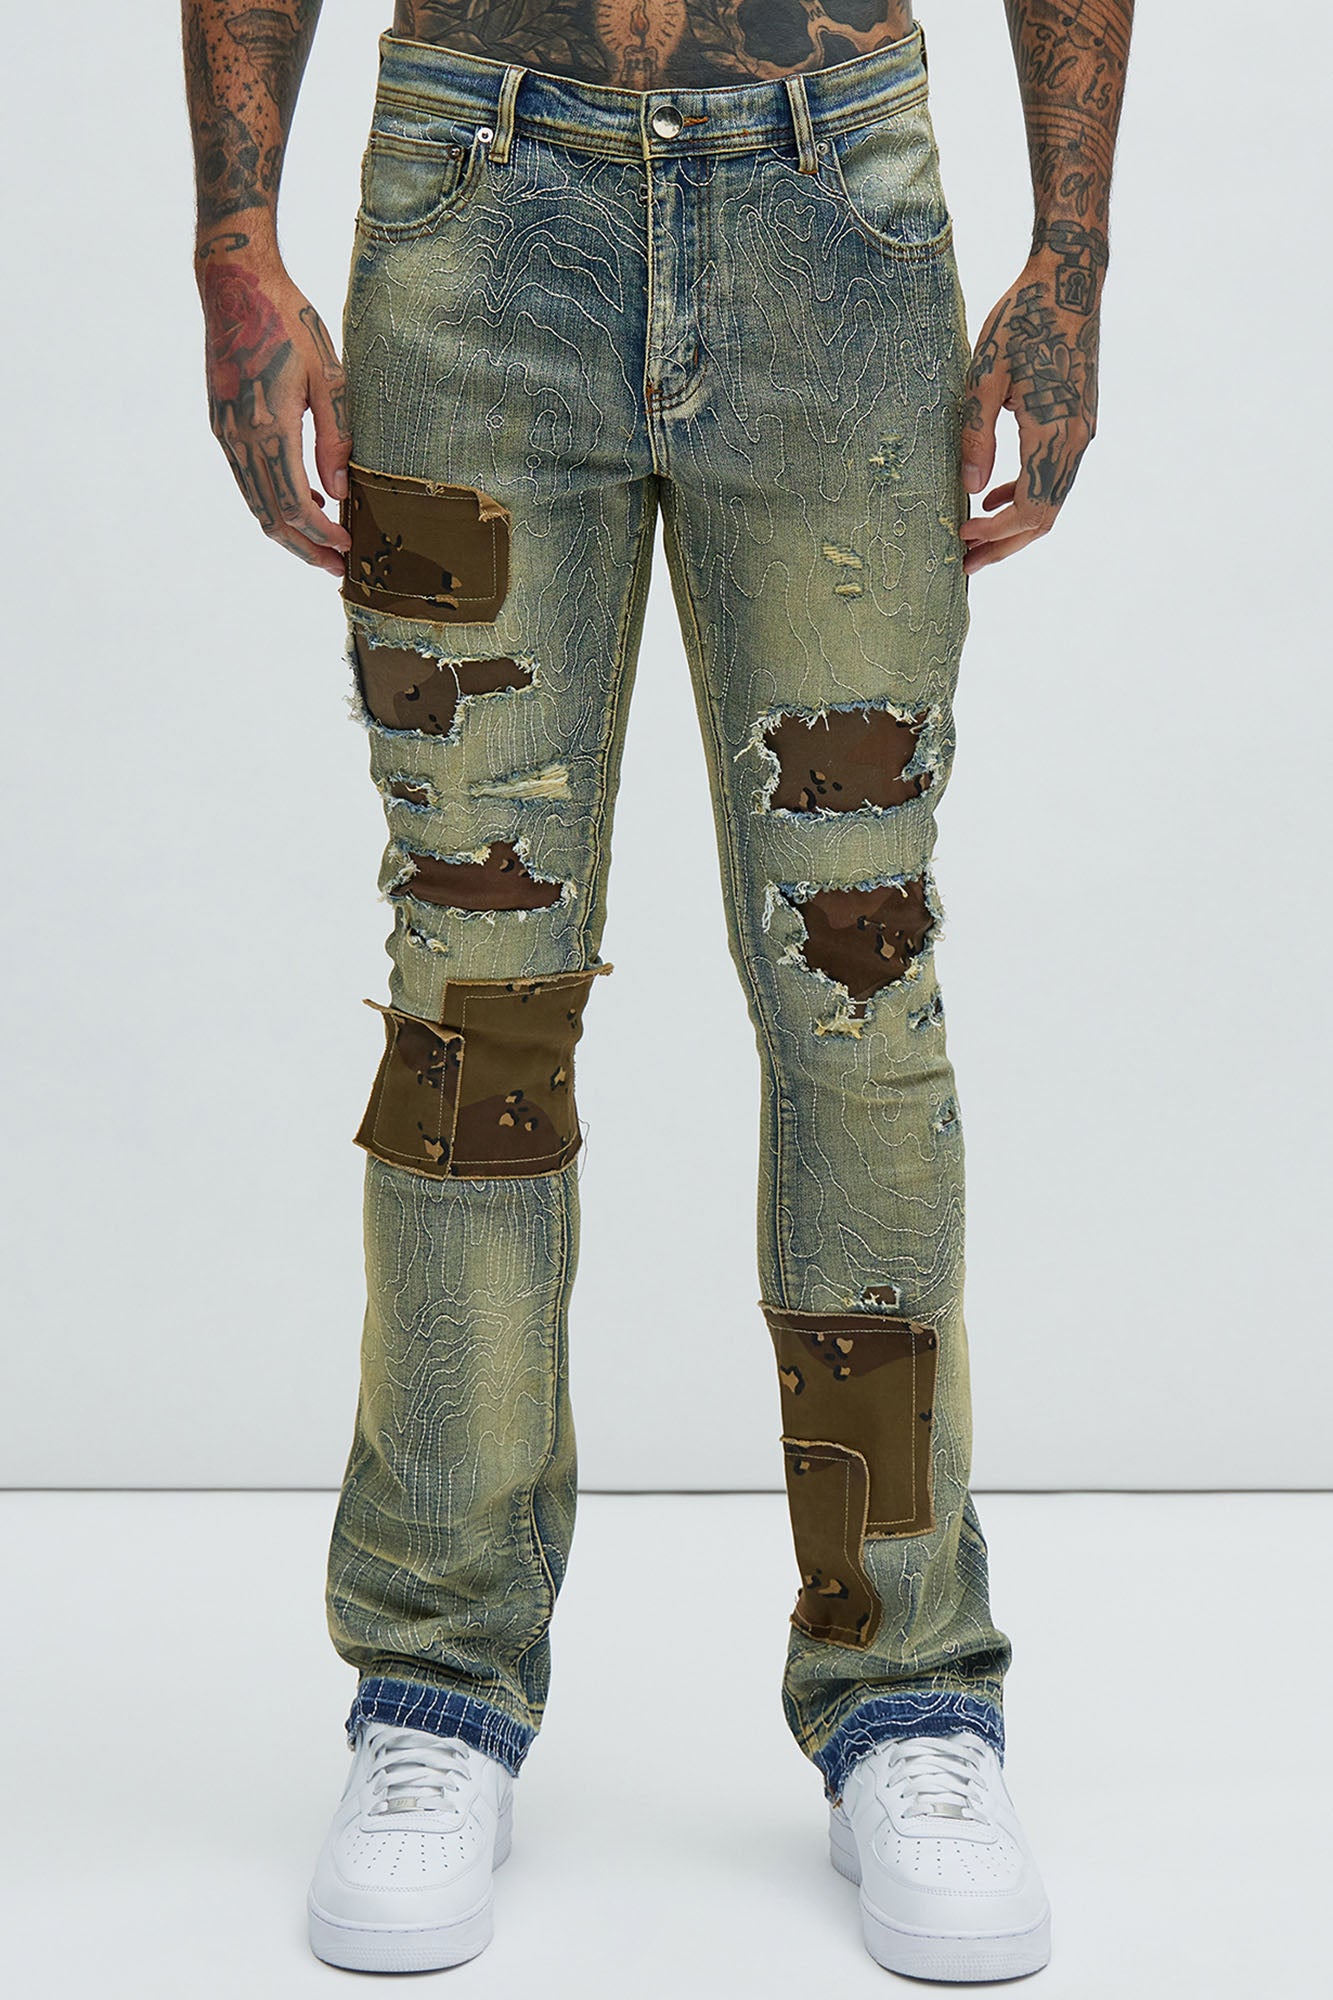 Ruthless Embroidered Stacked Skinny Cargo Flare Jeans - Medium Wash